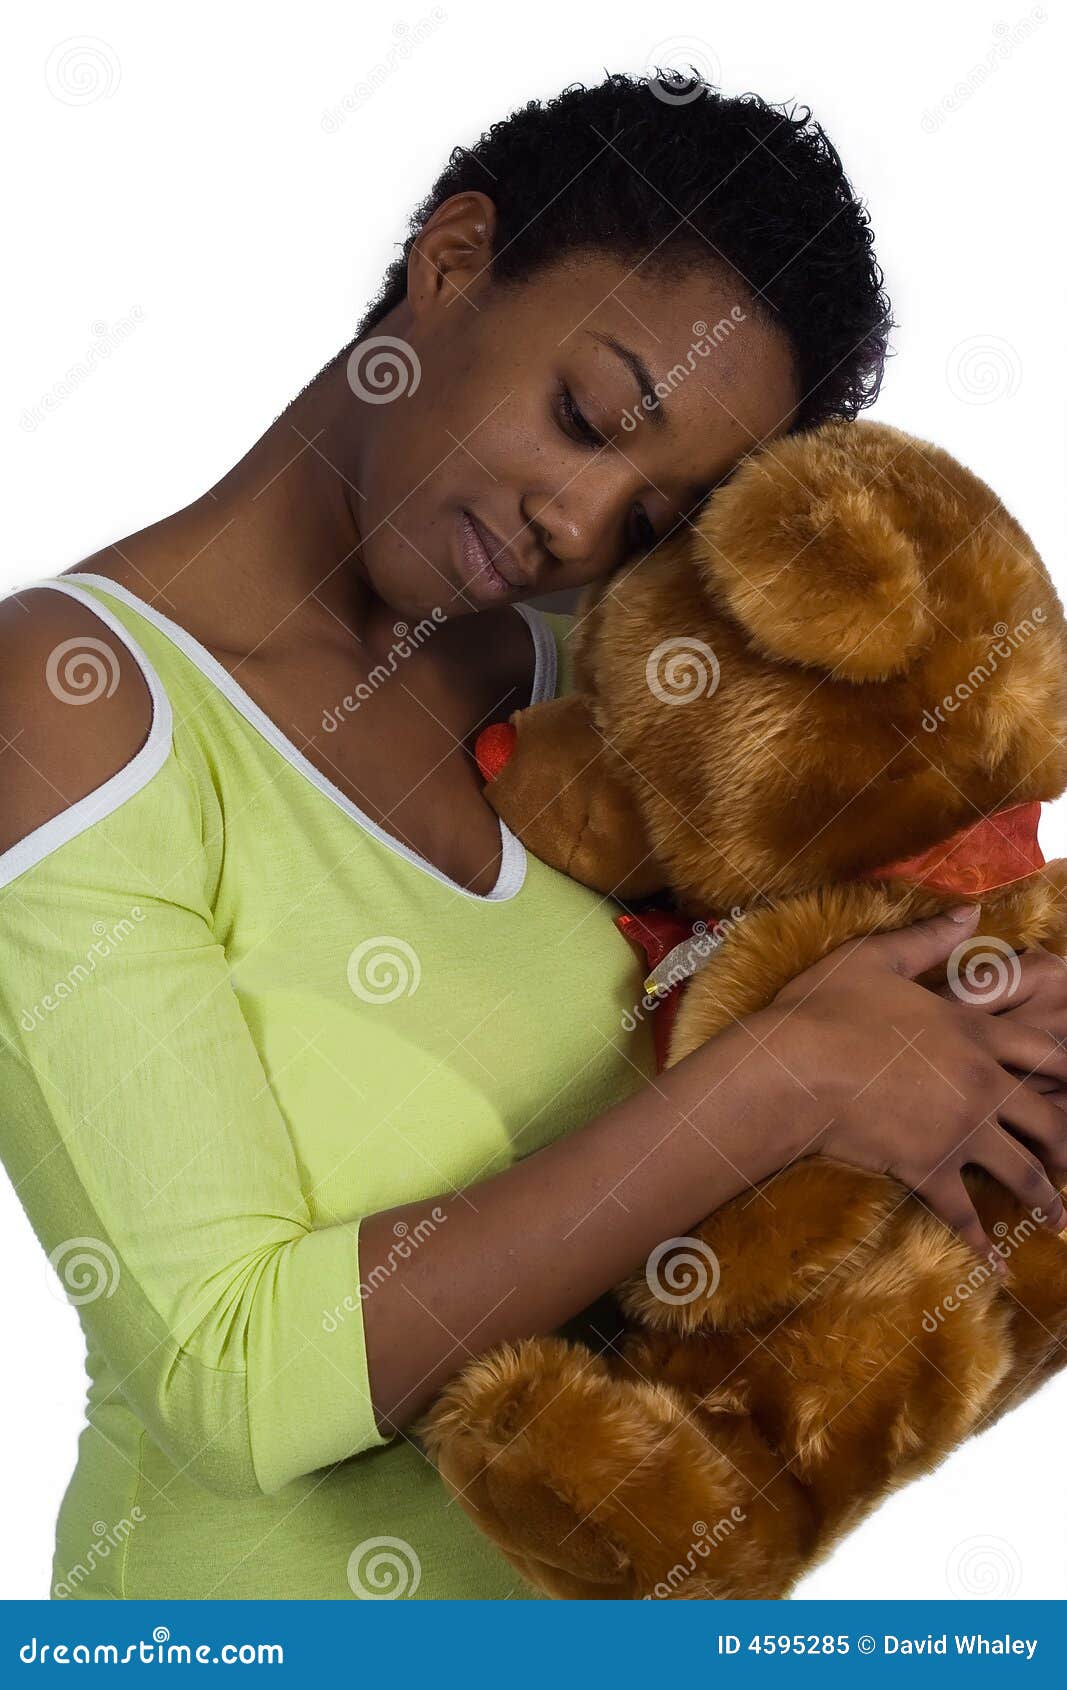 Cuddling with a teddy bear stock image. Image of face - 4595285